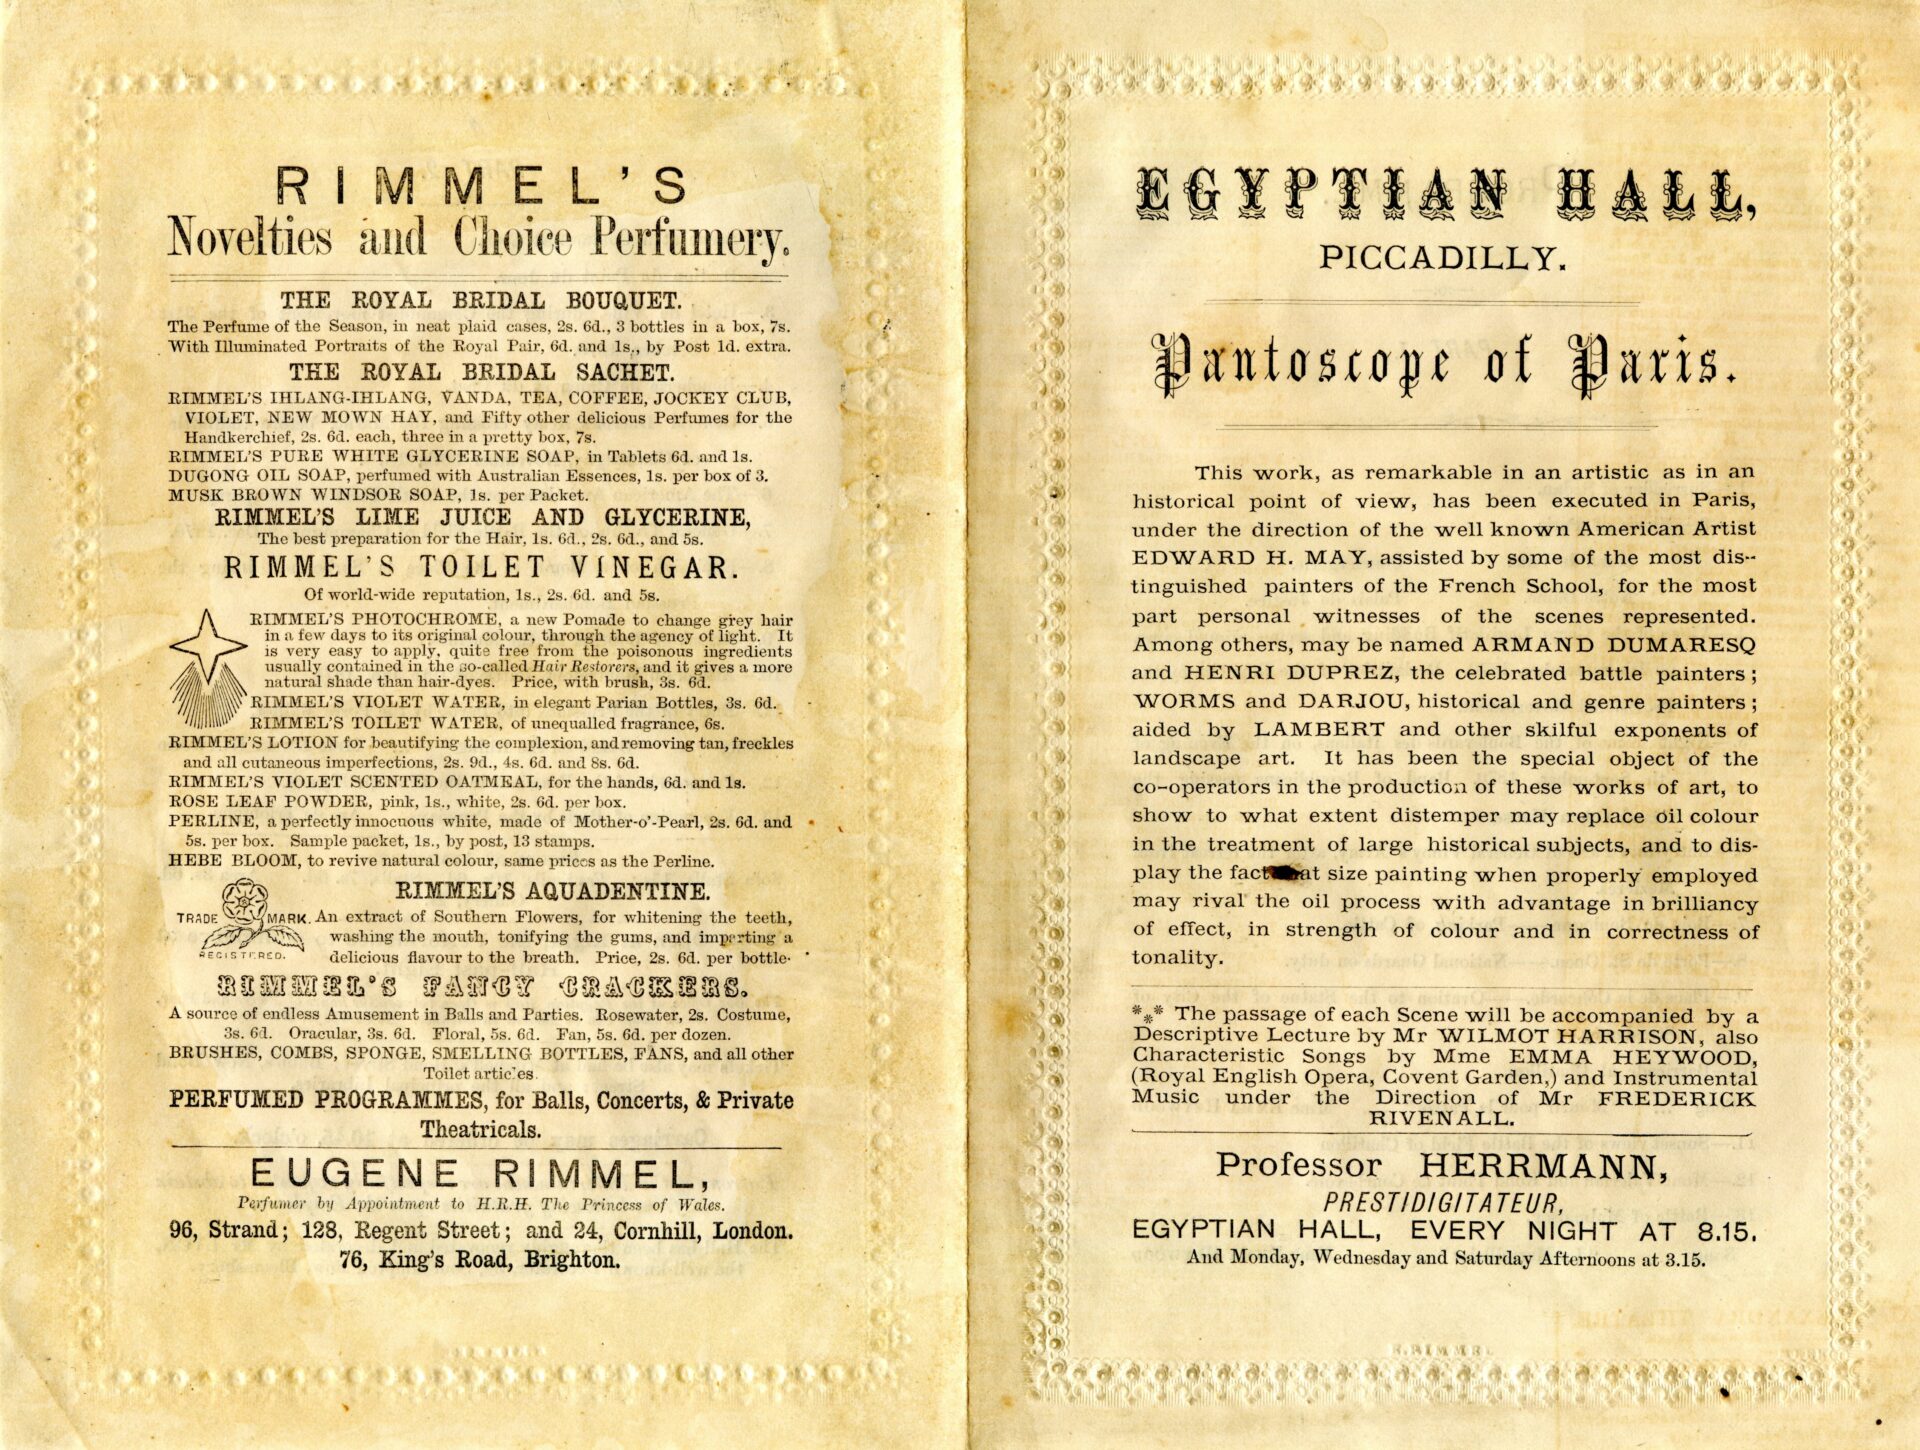 Programme for Pantoscope of Paris at the Egyptian Hall, circa 1871